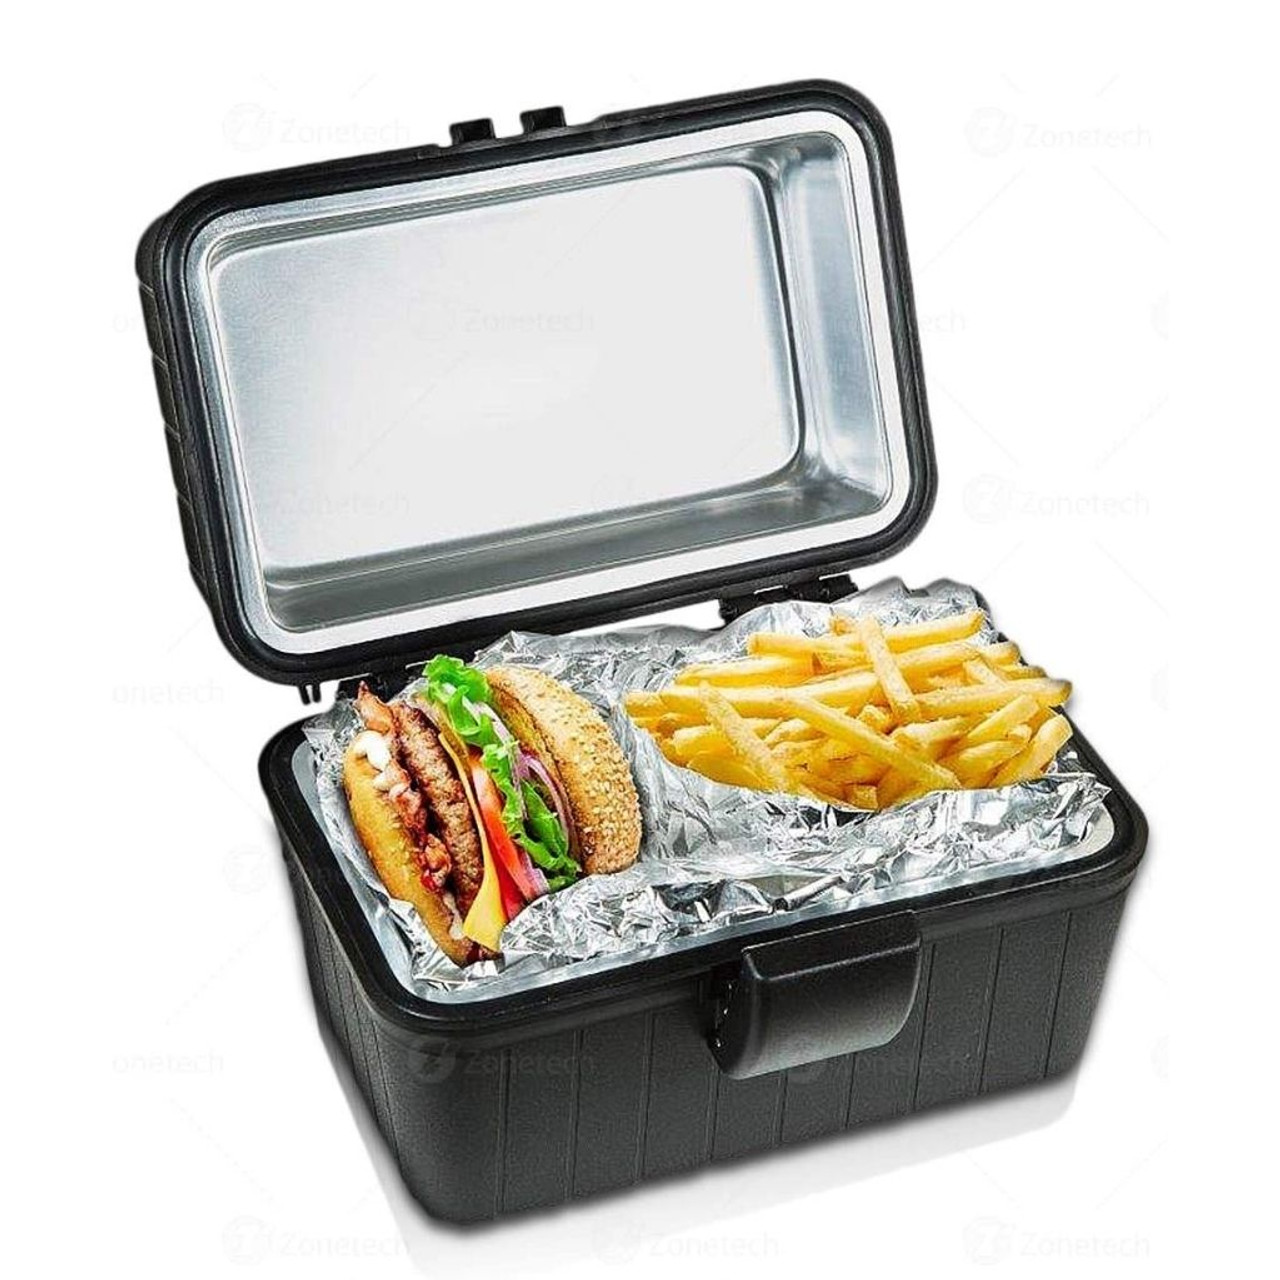 Zone Tech 11" Electric Food Warming Lunch Box product image